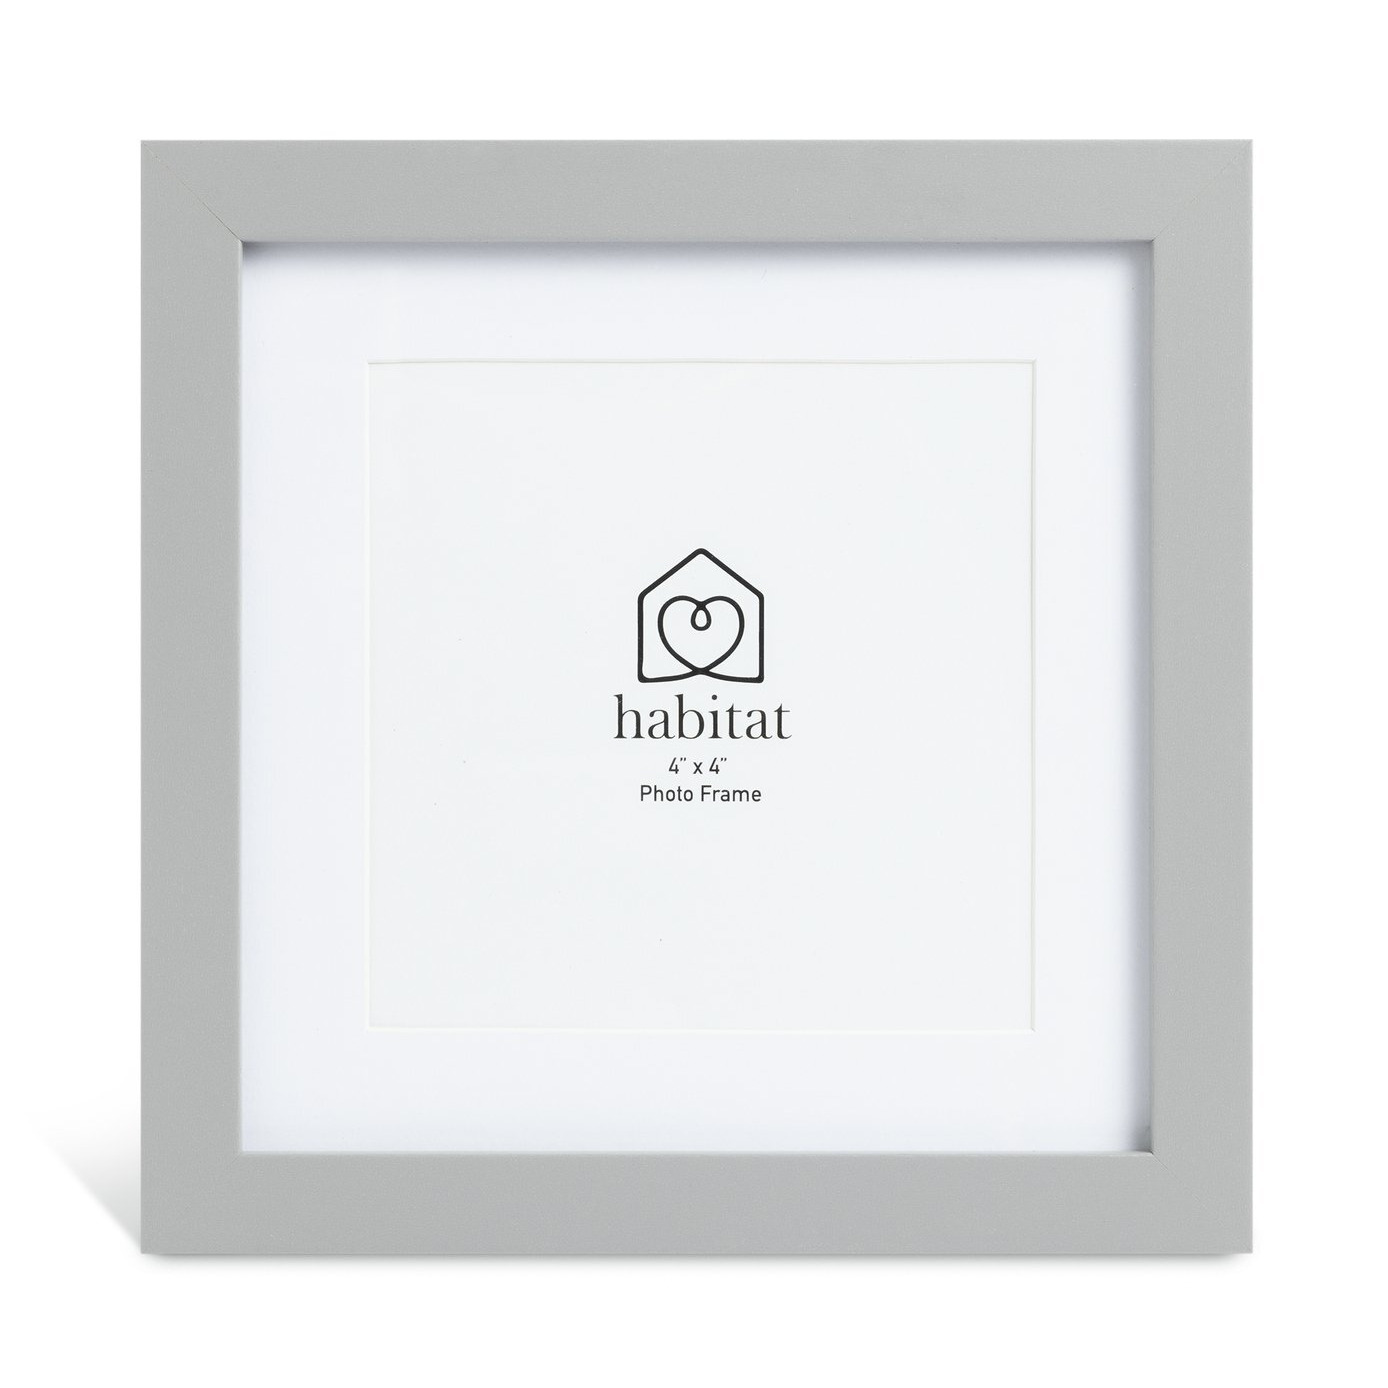 Habitat Wooden Picture Frame - Pack of 3 - Grey - 17x17cm - image 1